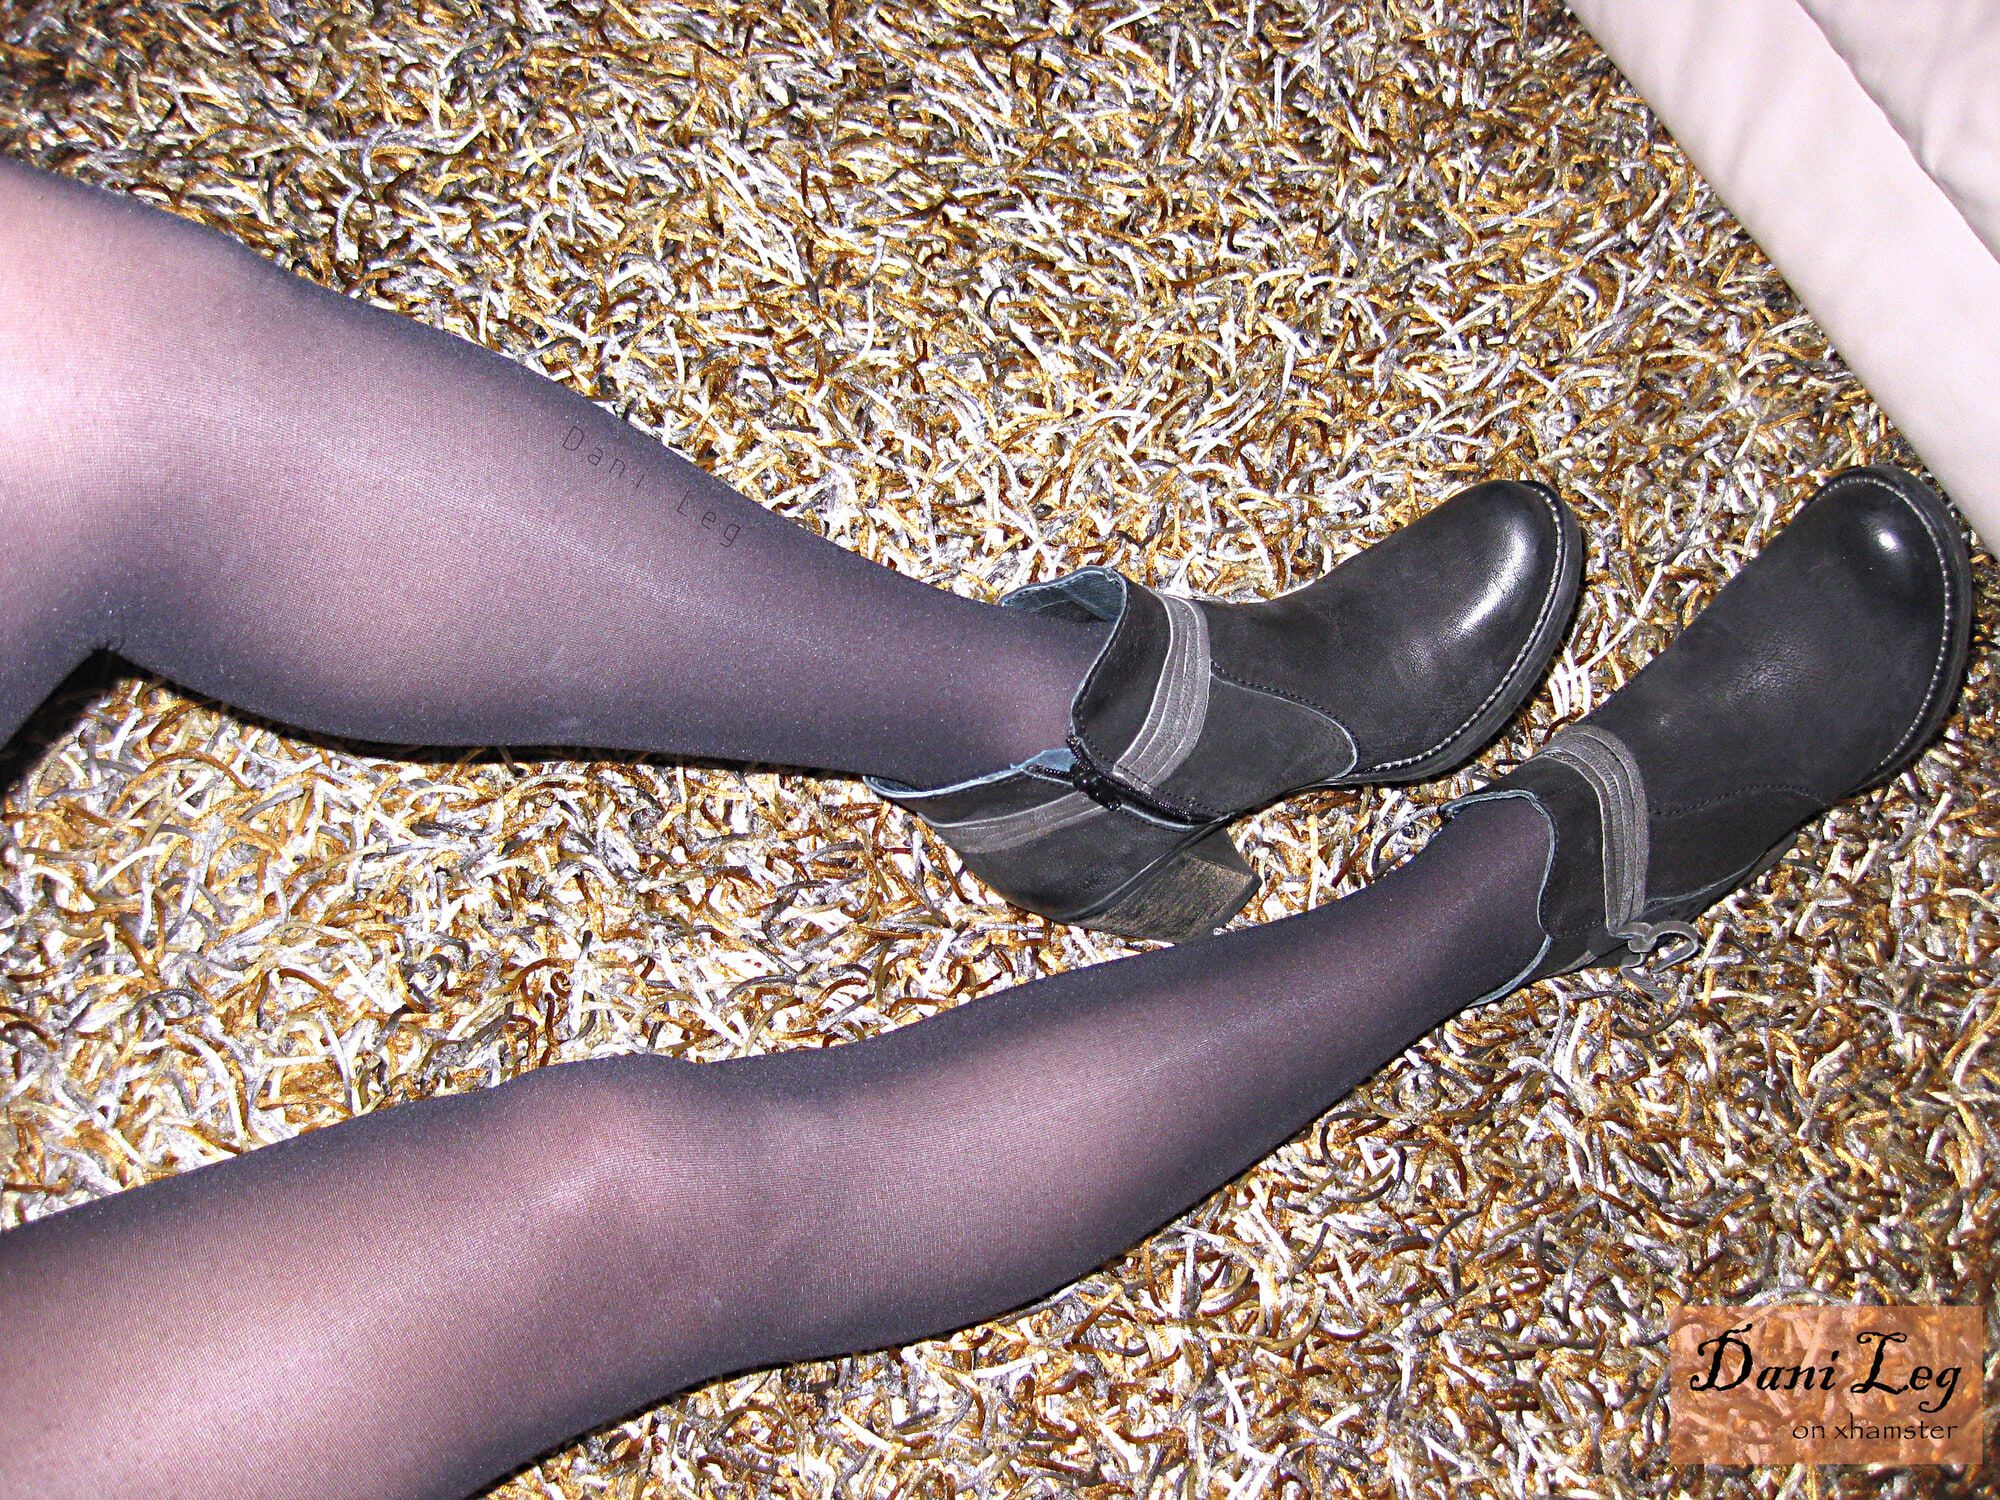 023P 40D Pantyhose and Boots